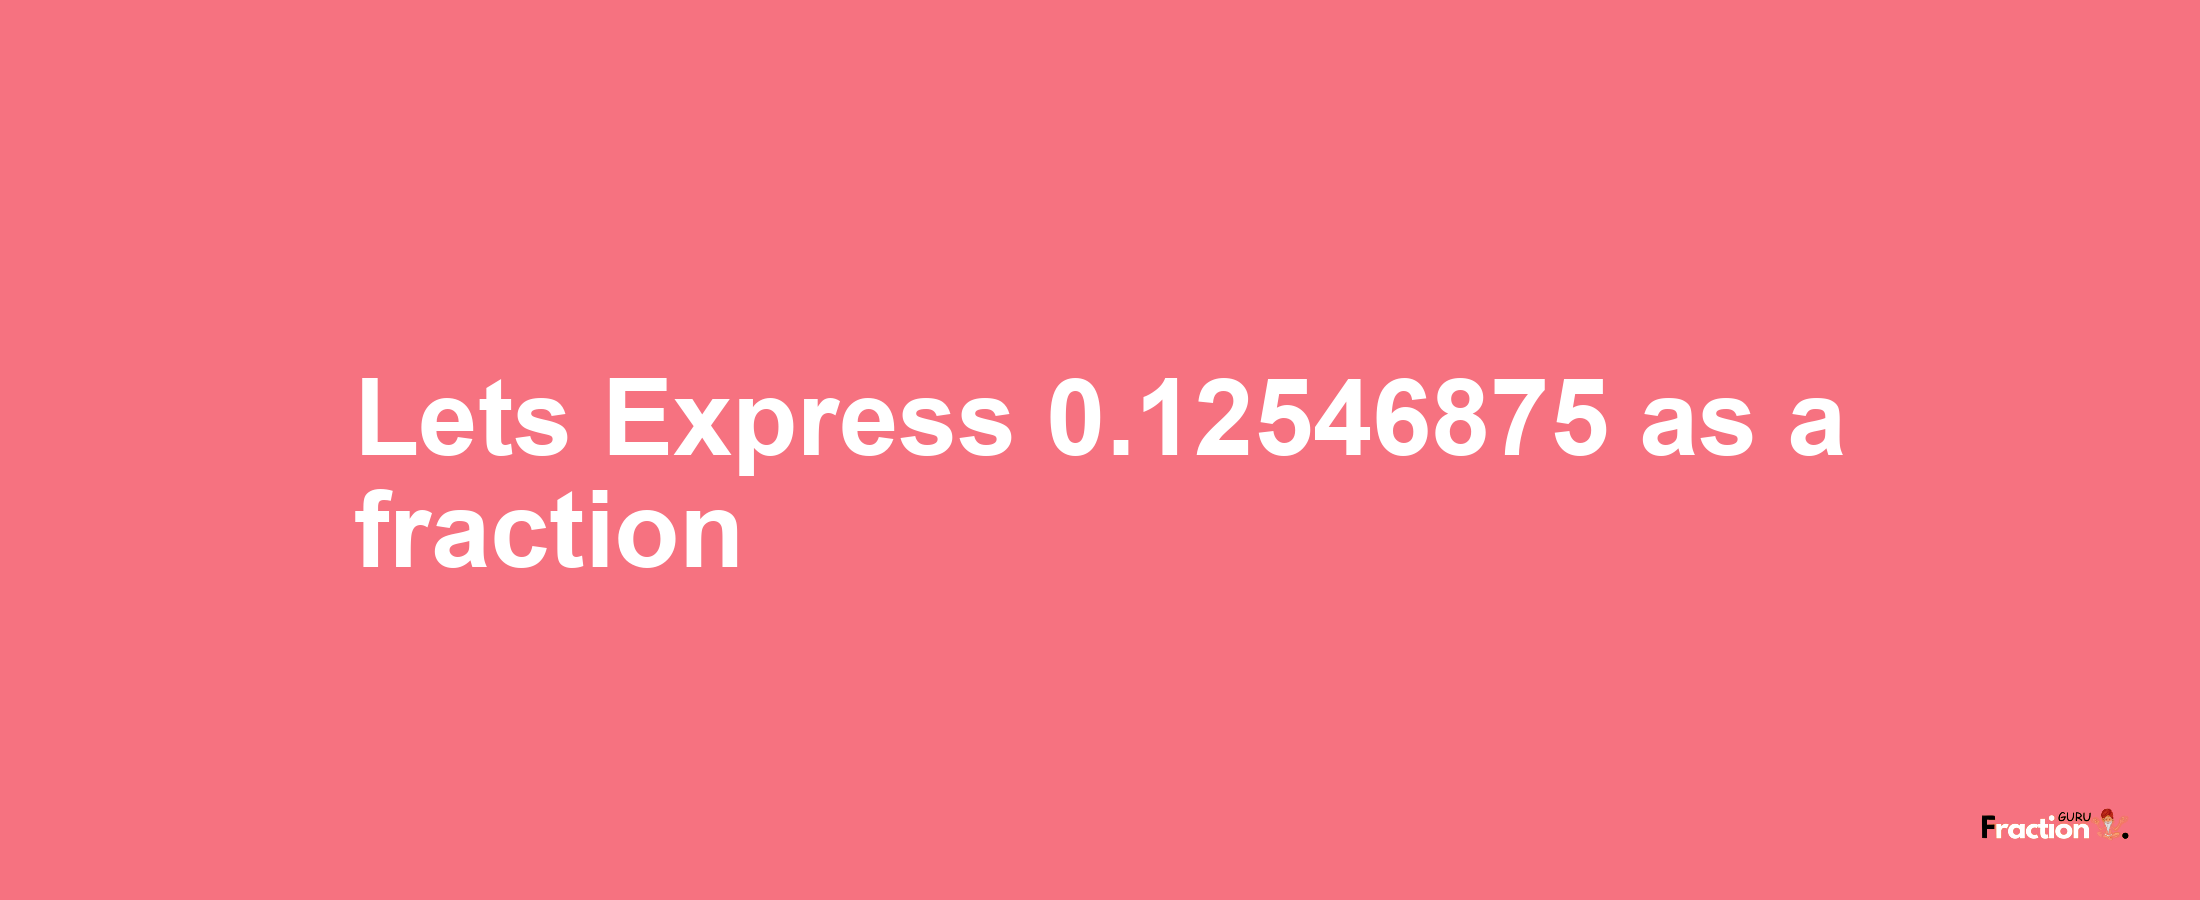 Lets Express 0.12546875 as afraction